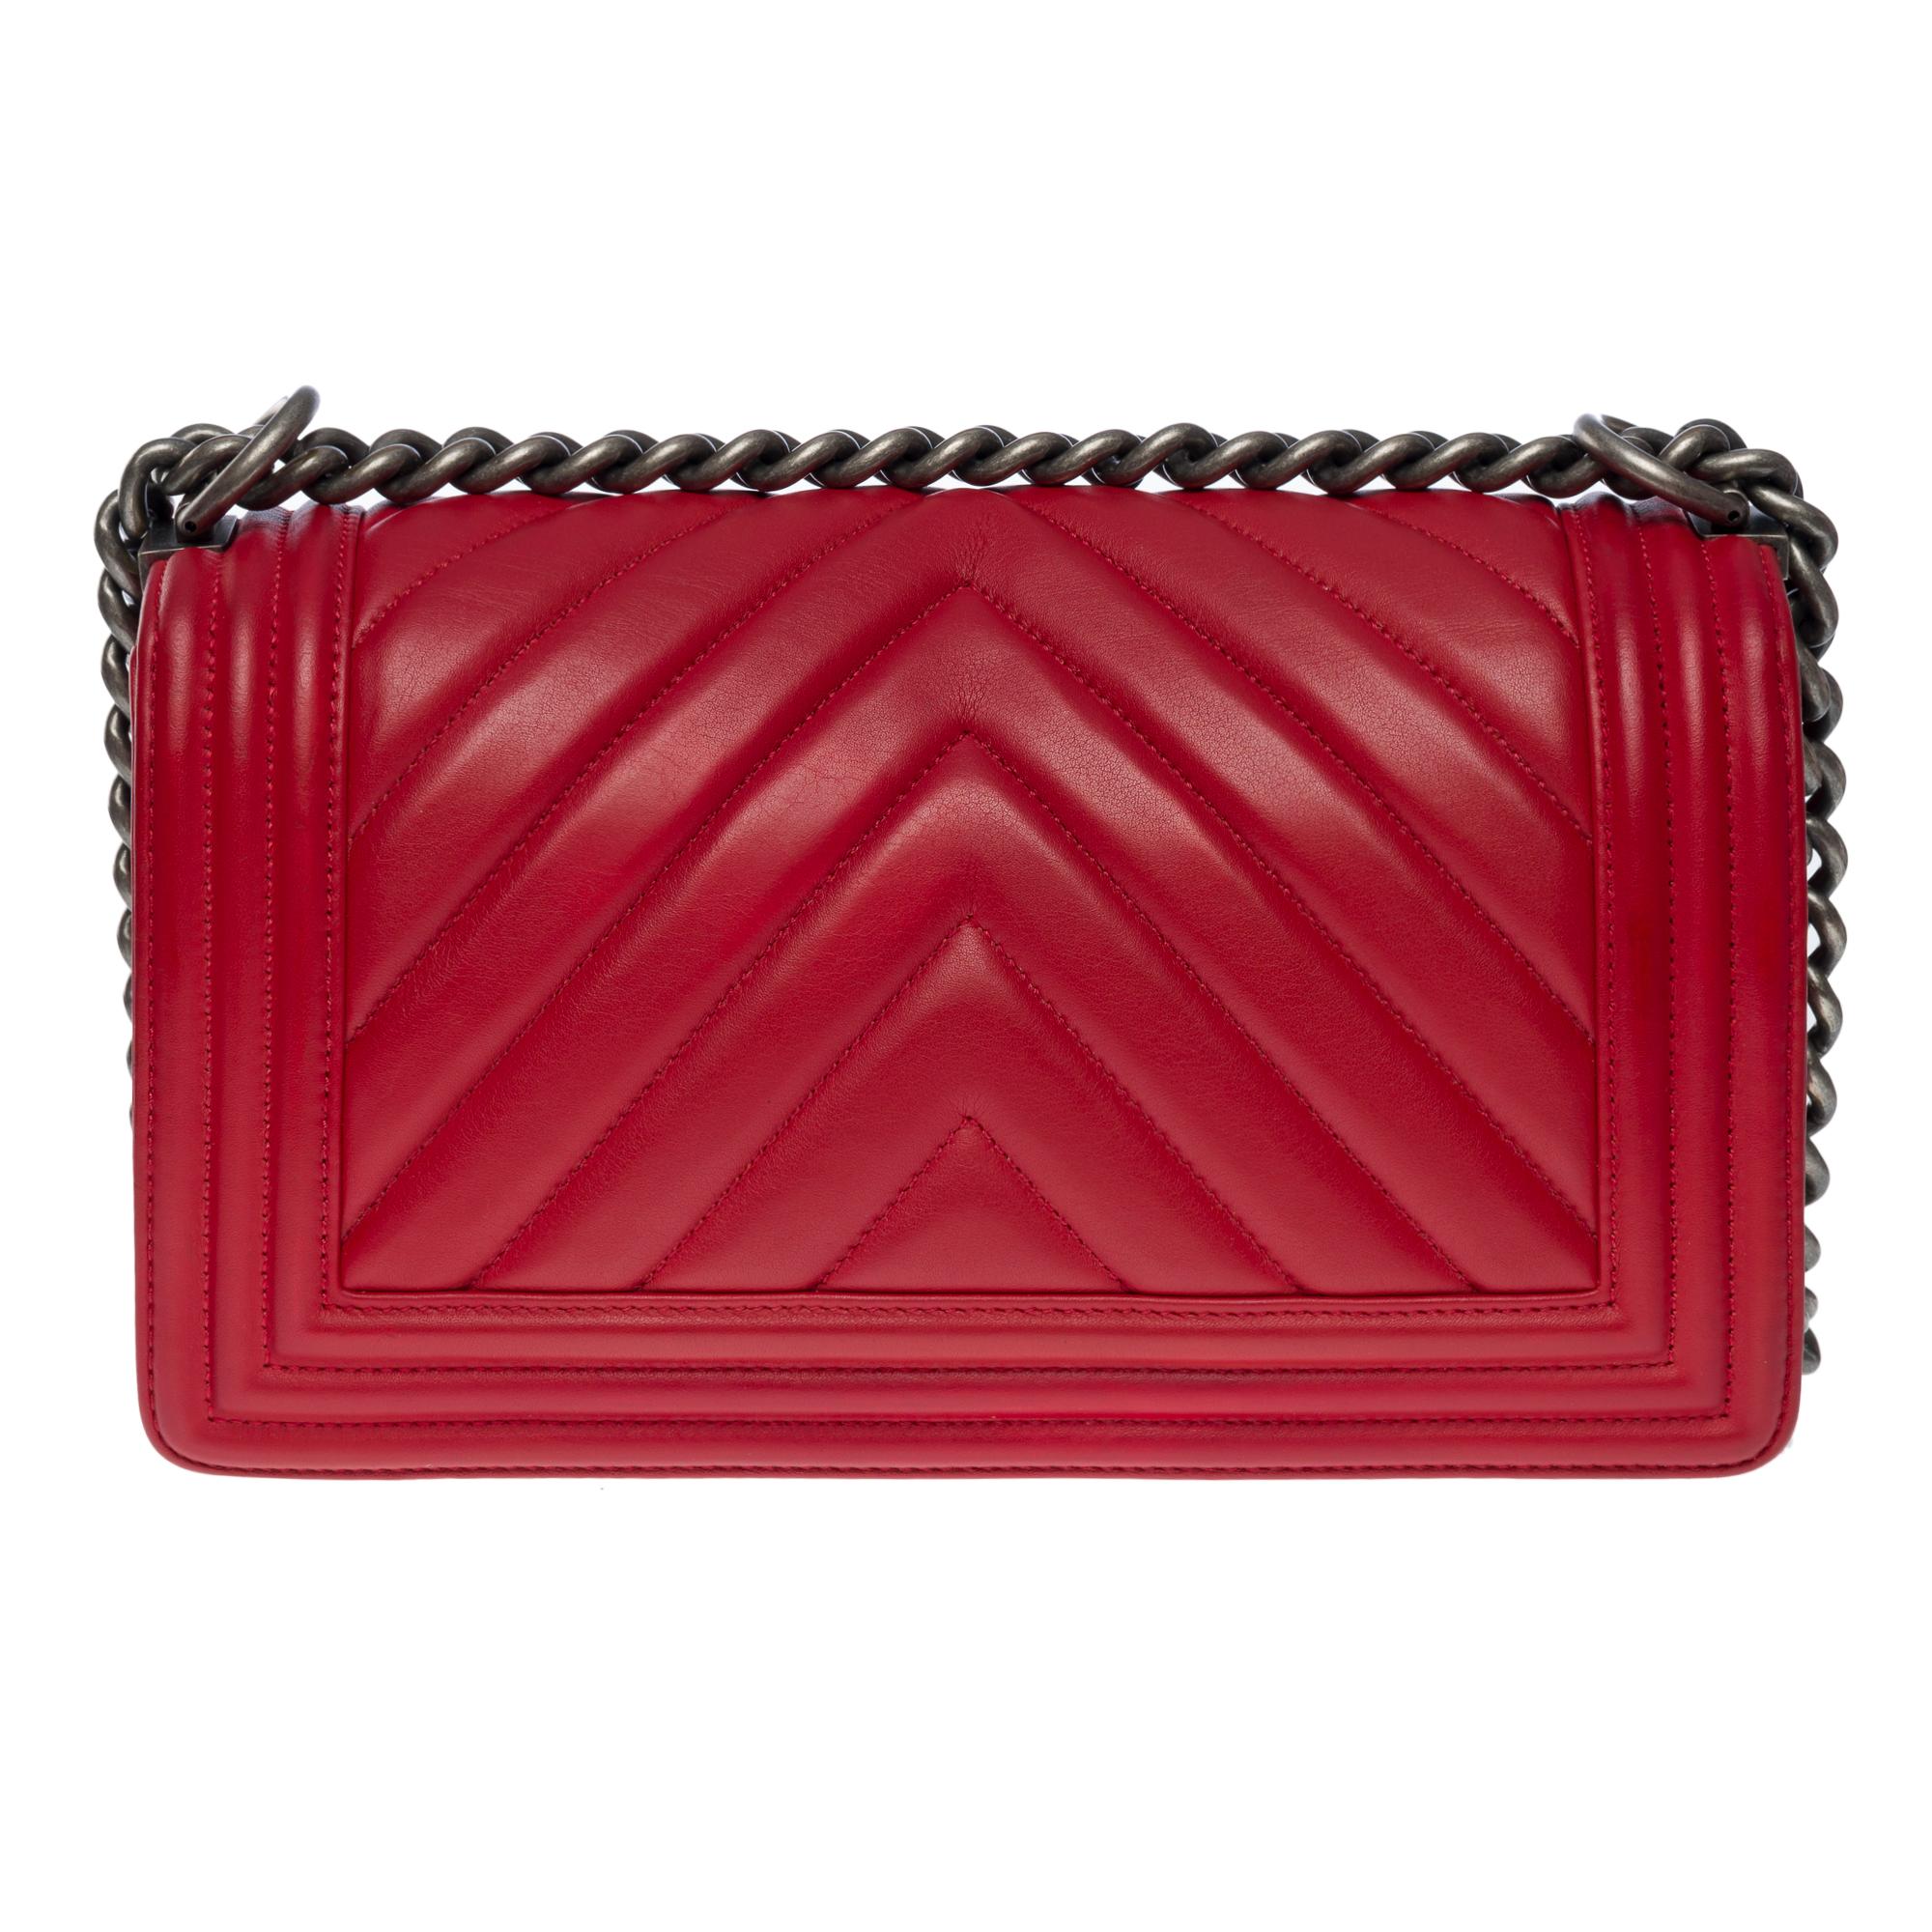 Chanel Boy Old Medium shoulder bag in red quilted herringbone leather, SHW In Good Condition For Sale In Paris, IDF